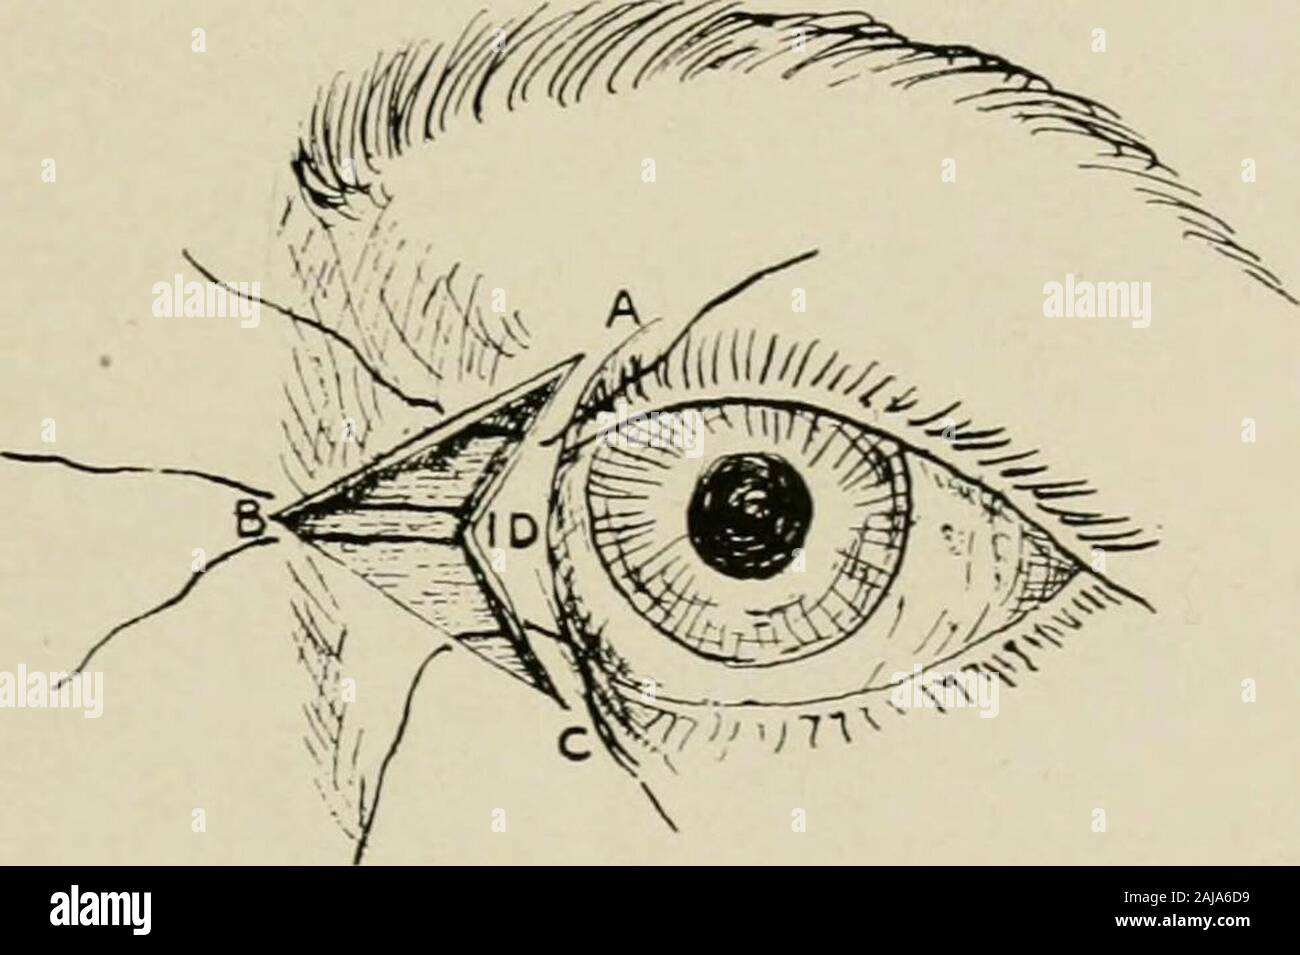 Plastic surgery; its principles and practice . Fig. 371.—Knapps operation (modified v. Ammon) for epicanthus.—An ellipse ordiamond-shaped piece of skin is excised from the bridge of the nose. The skin is under-mined and the edges are closed.. Fig. 372.—Operation for epicanthus (Berger).—An incision is made from the upper,and also the lower parts of the fold, to a point on the nose in line with the inner canthus,thus making a V-incision. From the ends of this incision two others are made which con-verge at a greater angle than the preceding, thus marking out the area ABCD, which isexcised. The Stock Photo